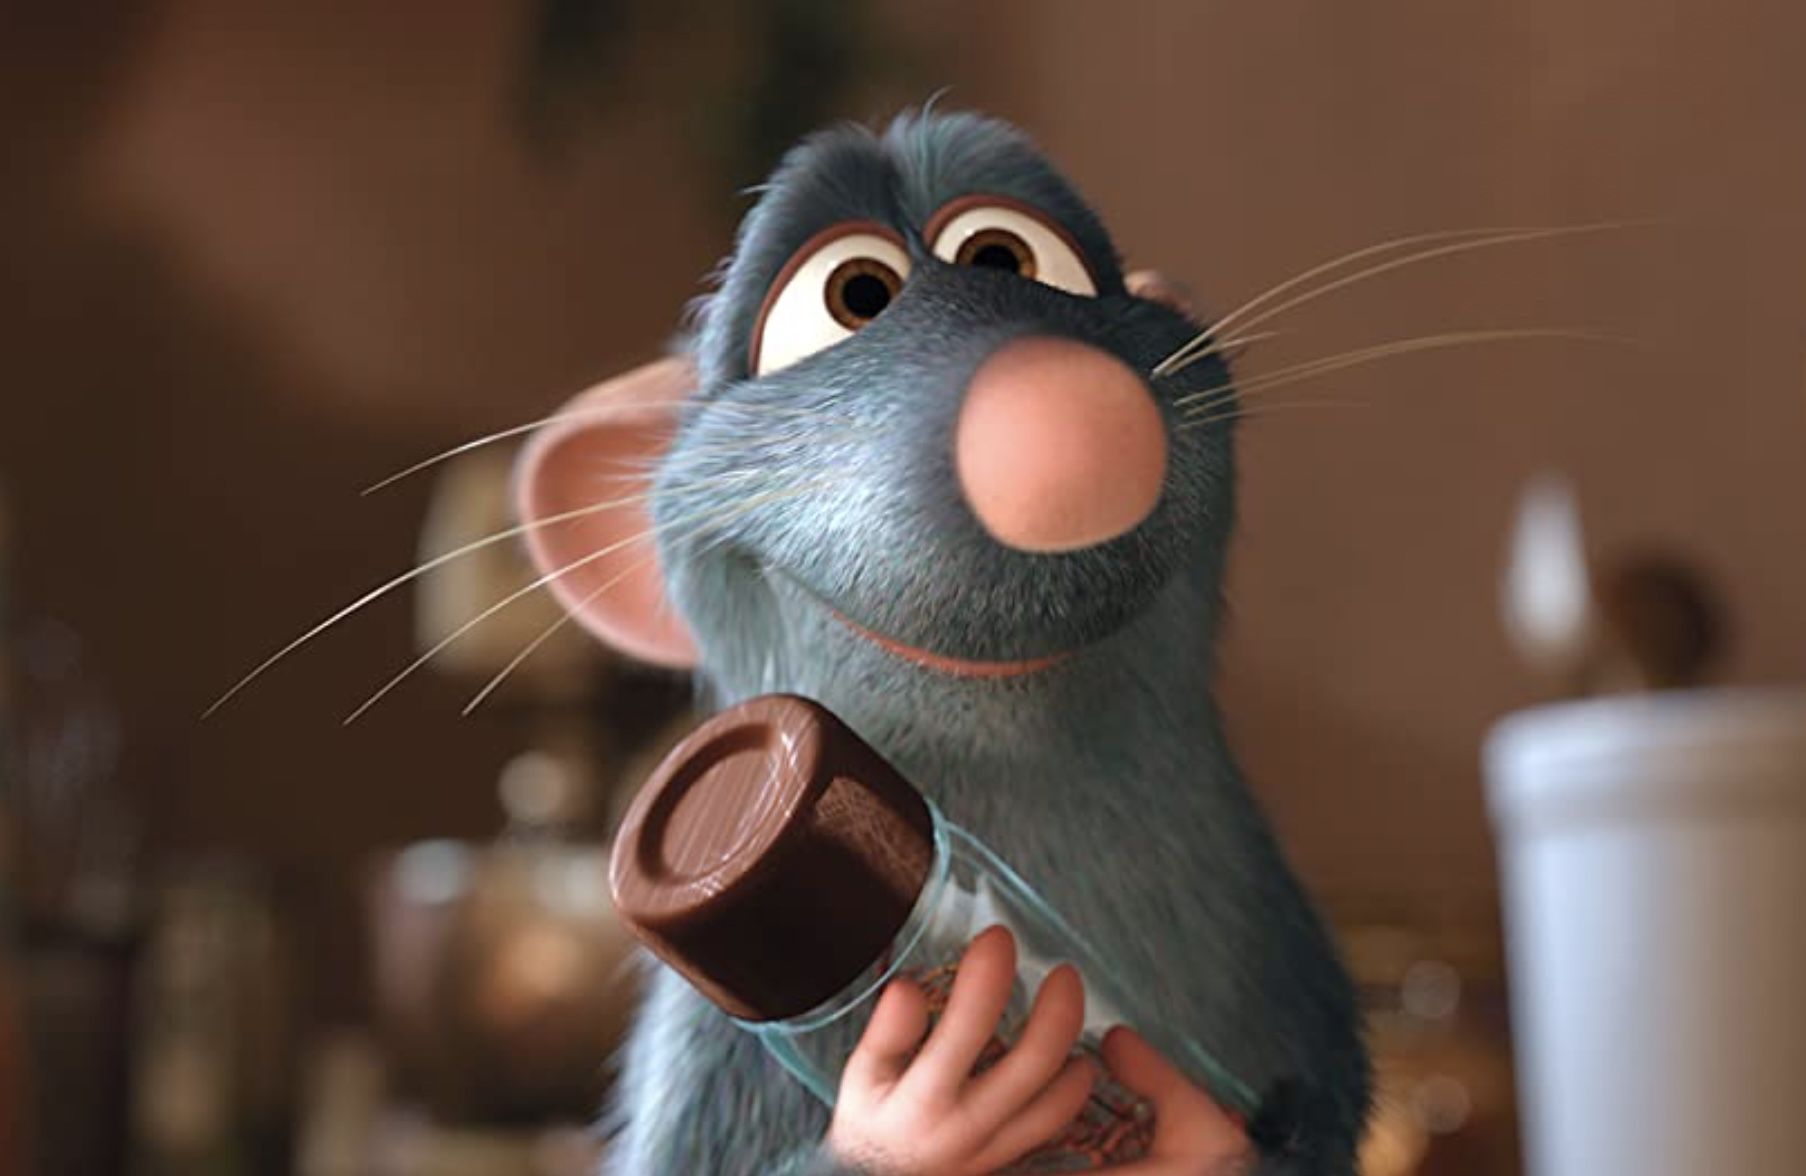 <p>Pixar’s Ratatouille is the story of a rat who wants to become a chef. To get everything exactly right, the filmmakers consulted with Bay Area celebrity chef Thomas Keller, who taught them the ways of an authentic French kitchen and helped them make the CGI food look like the real thing. The film’s crew was also <a href="https://www.sfgate.com/bayarea/article/BAY-AREA-FLAVORS-FOOD-TALE-For-its-new-film-2583956.php">sent to cooking classes</a>, where they learned everything from the correct knife-holding technique to the creation of sauce and pastry stations.</p>